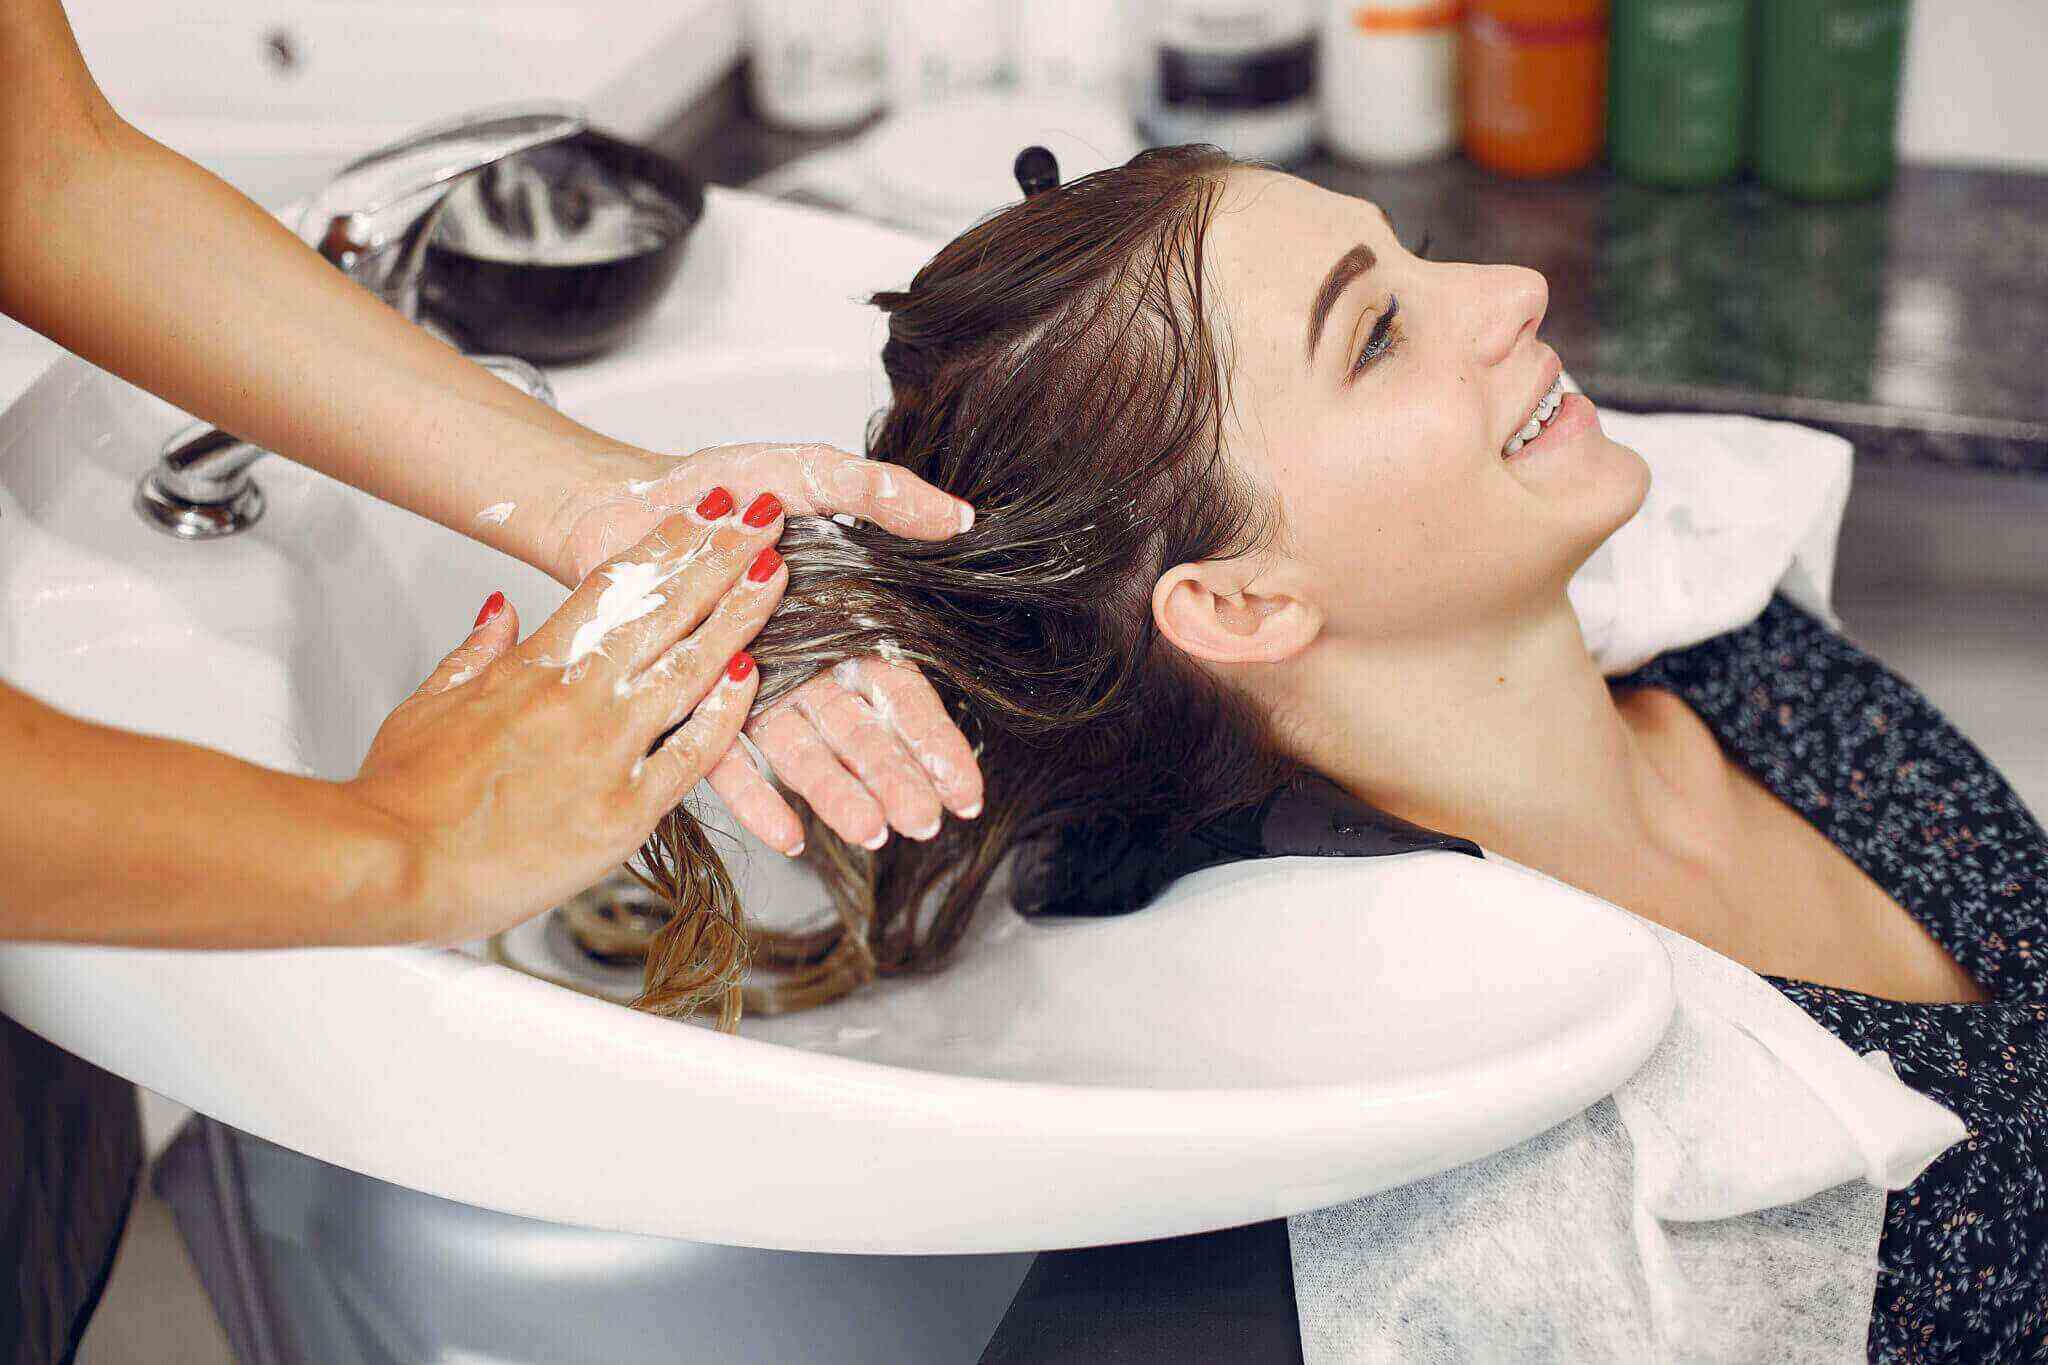 Hair Spa: Definition, Uses, Benefits, Types, Disadvantages, etc